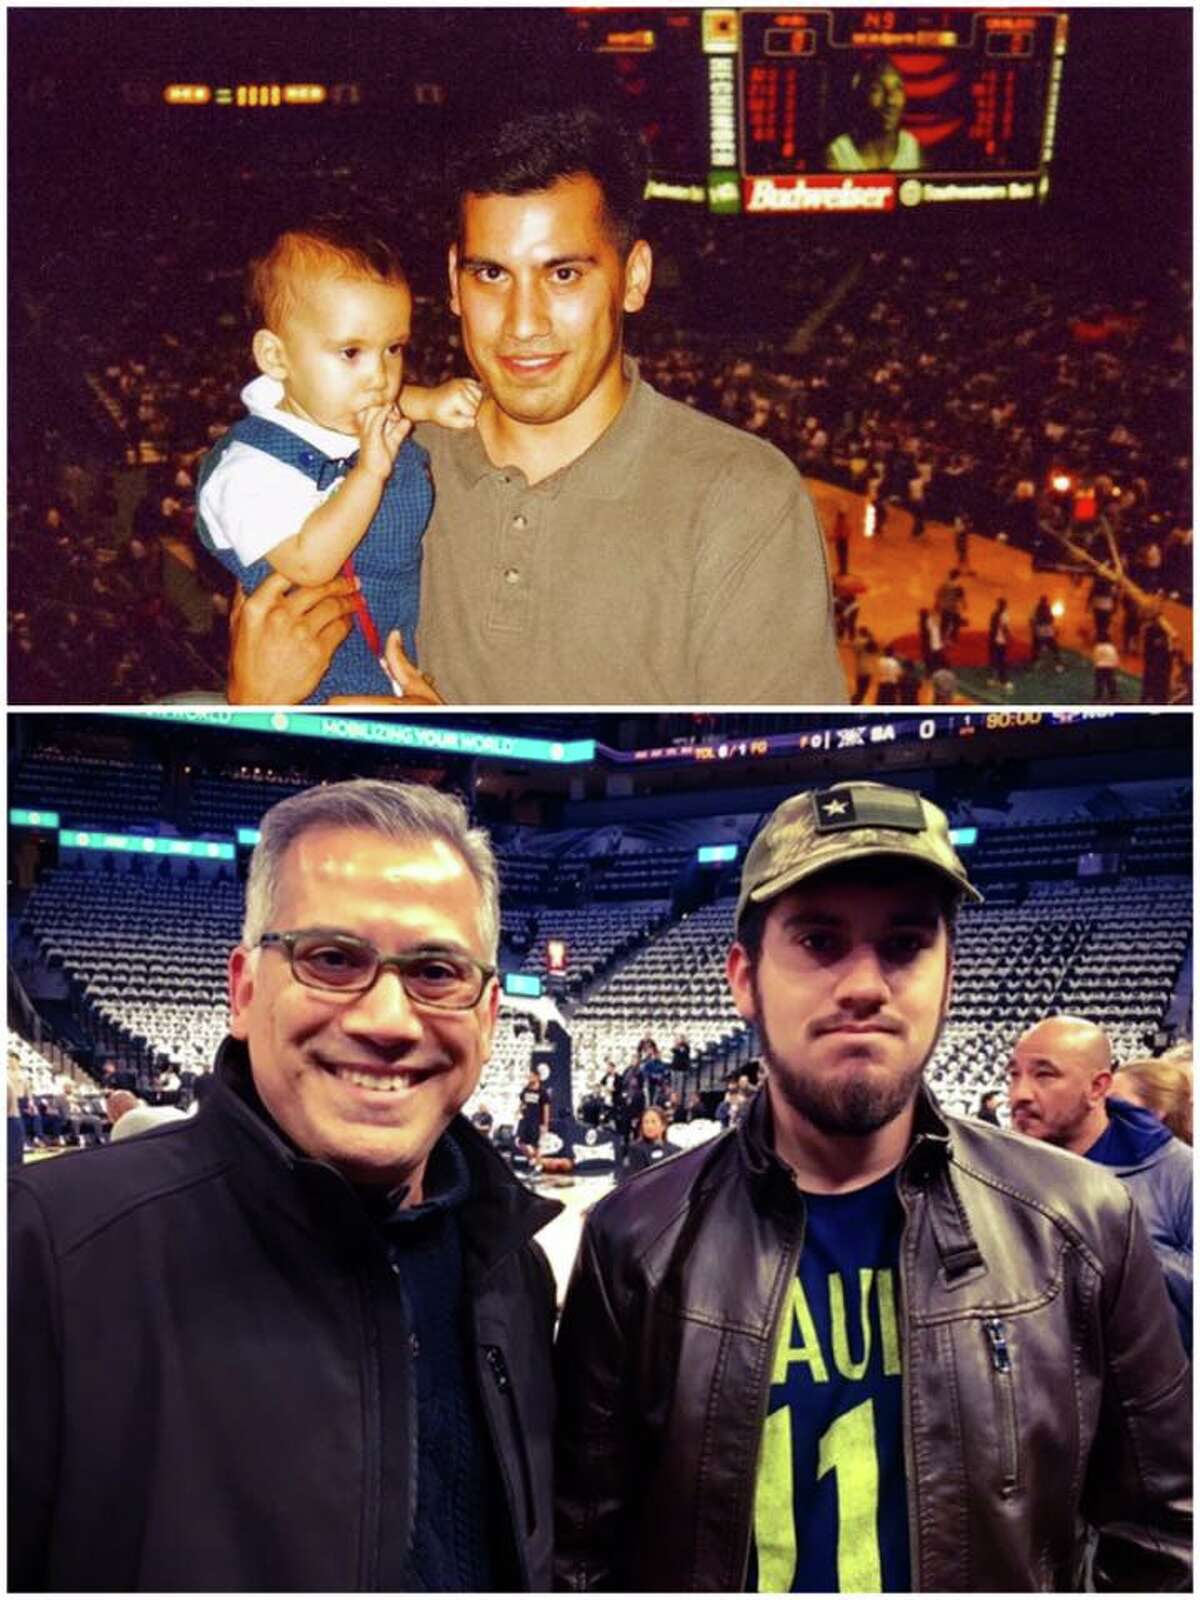 David Martinez and his son Quincy attended Tim Duncan’s first home game with the Spurs 19 years ago at the Alamodome. On Sunday he and his son were on hand at the AT&T Center to watch Duncan’s jersey go to the rafters during a special retirement ceremony.